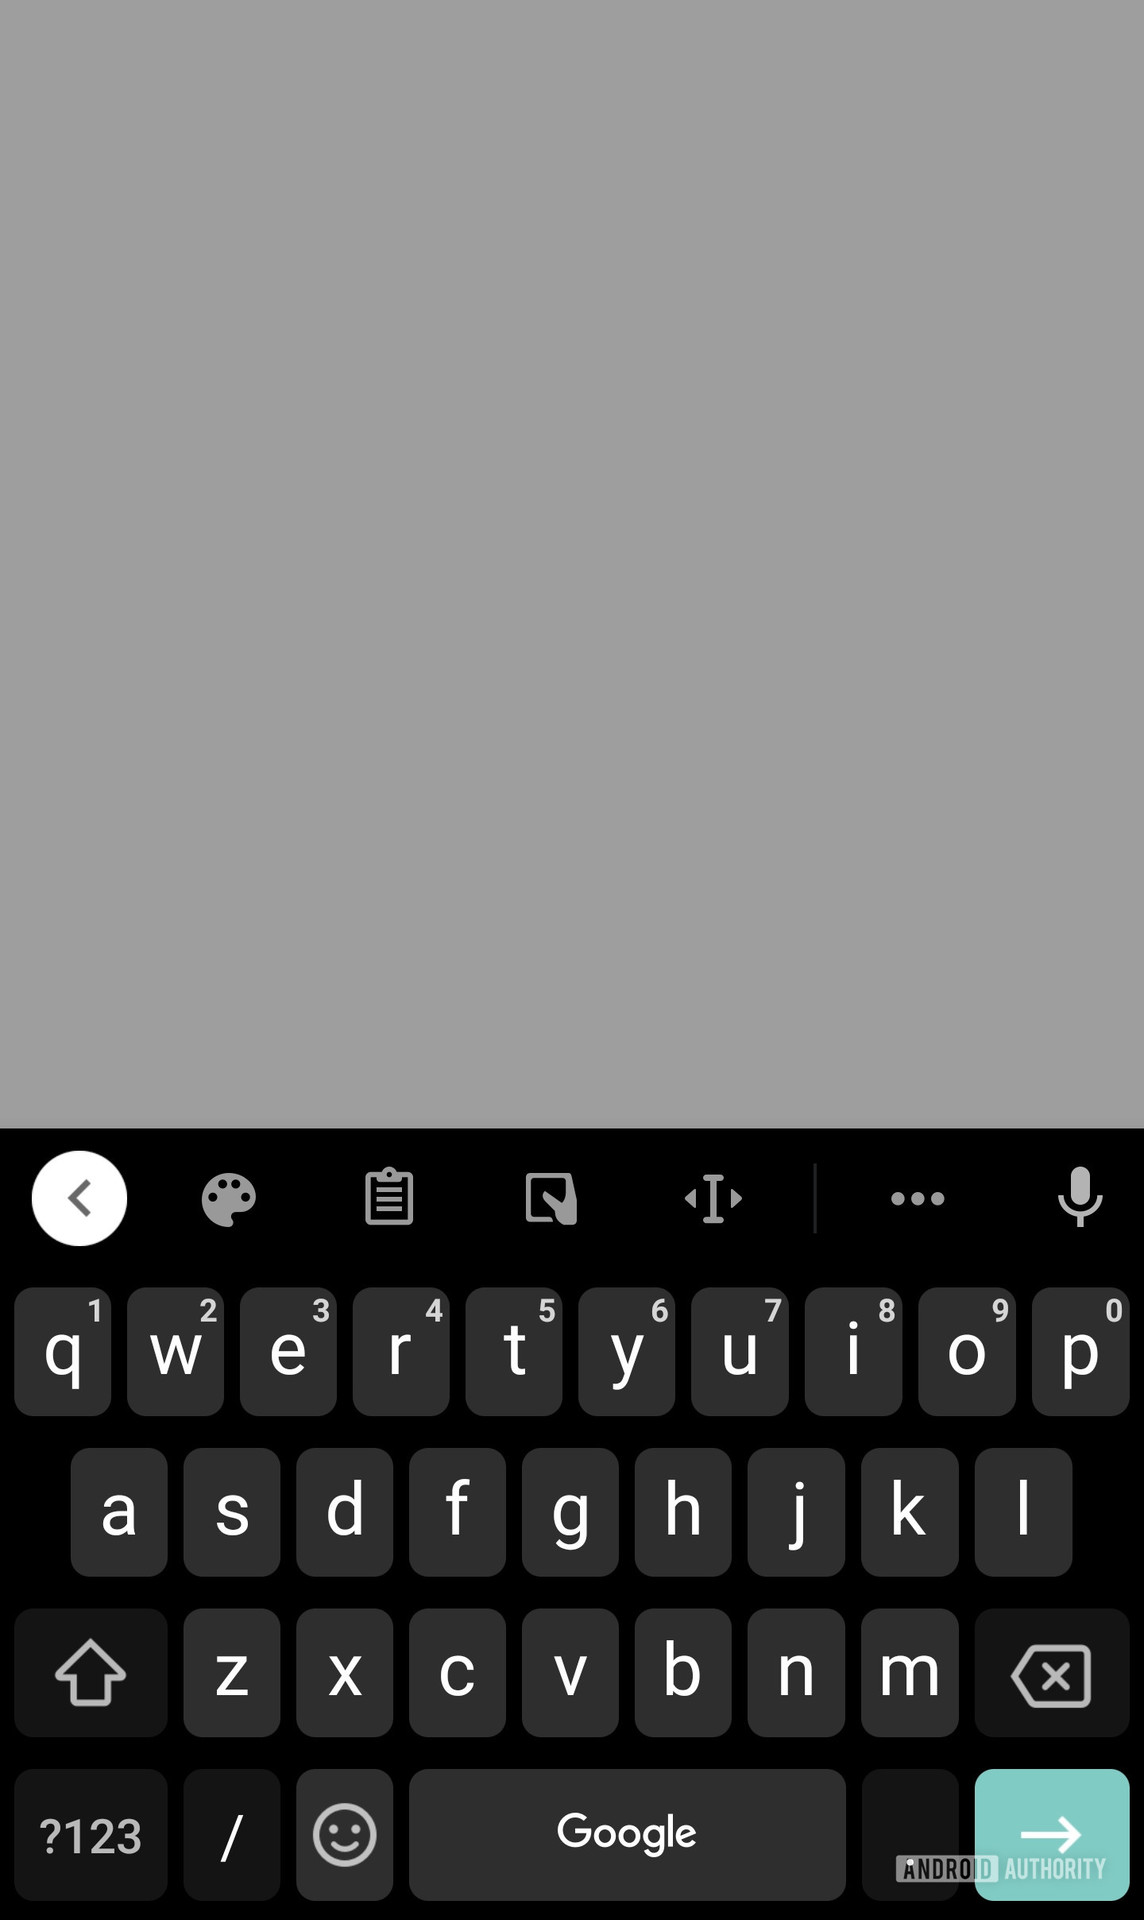 Gboard with the Google branding in the spacebar.